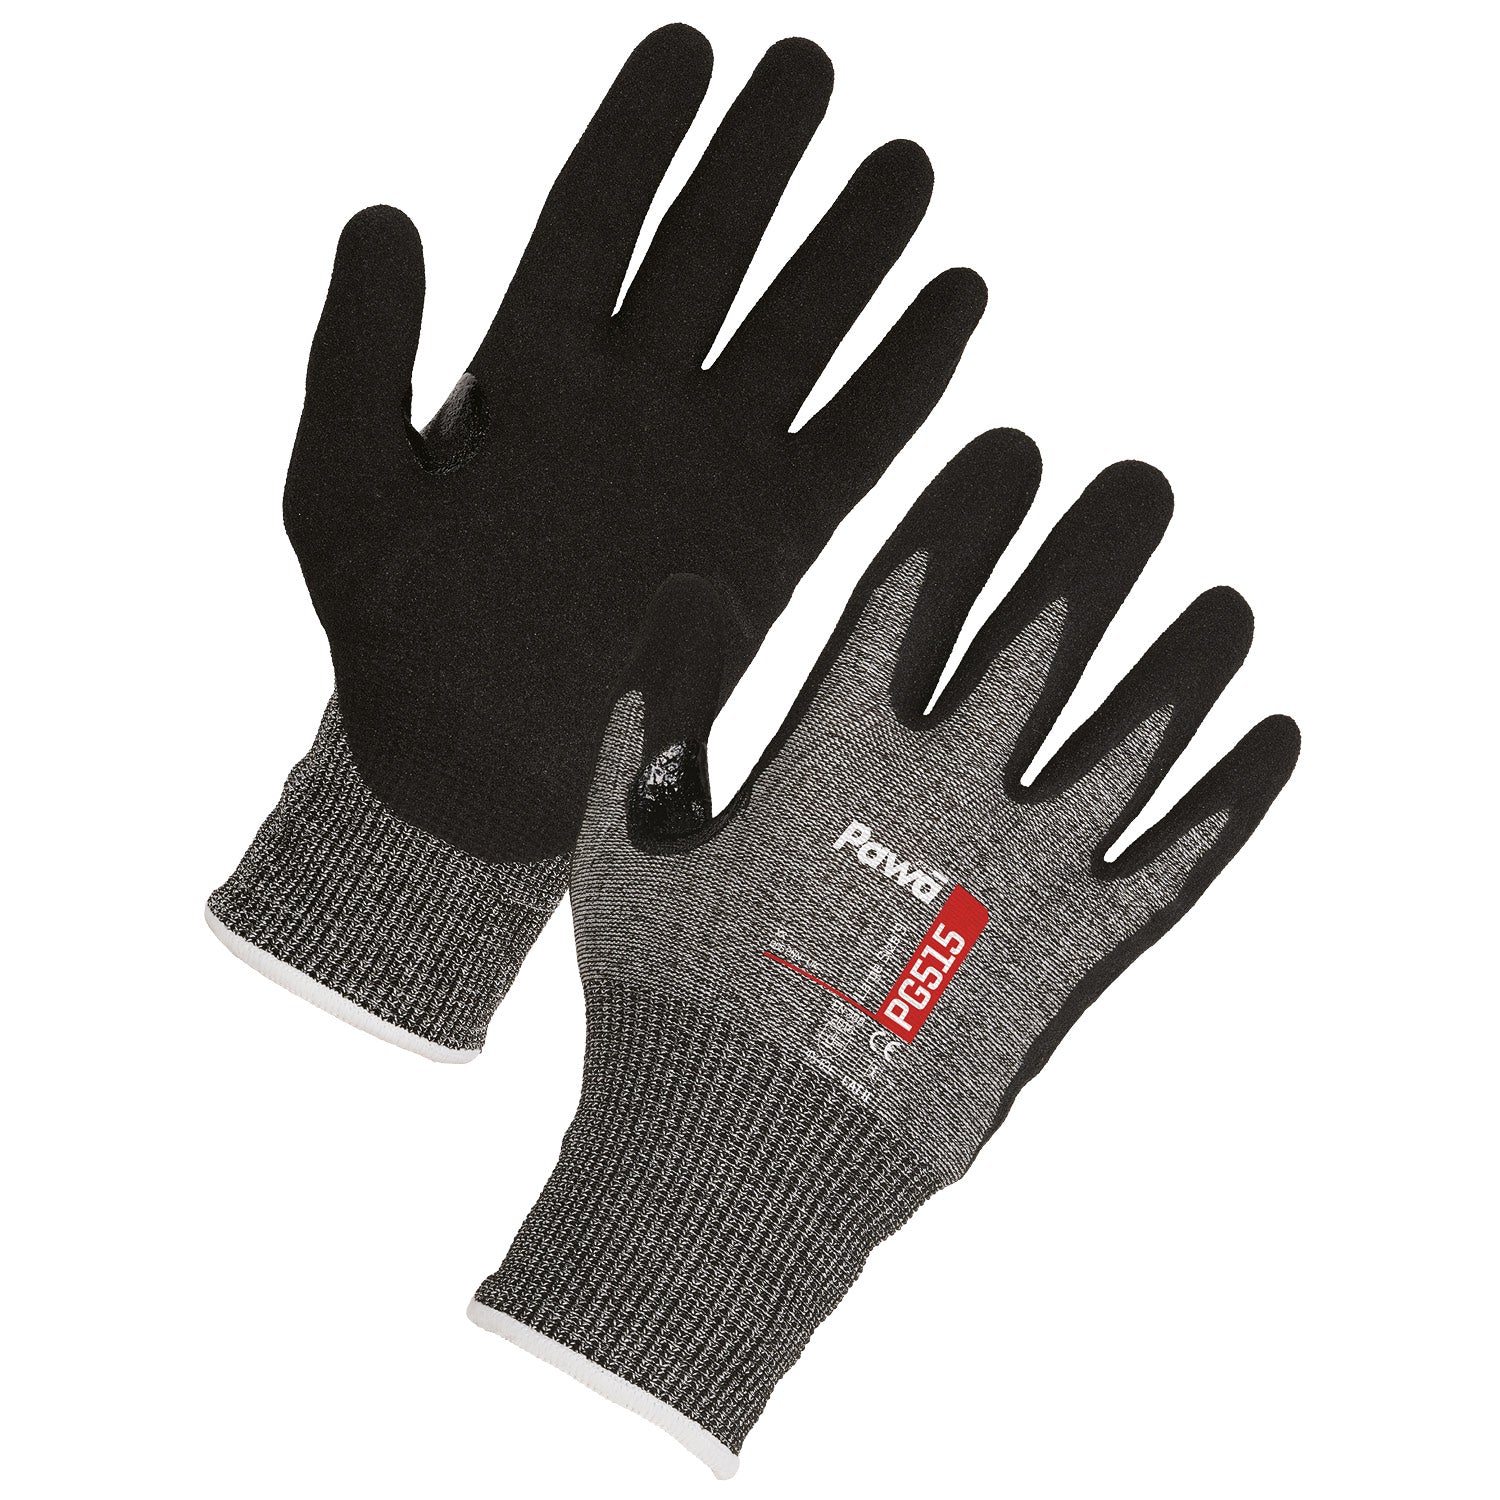 Supertouch Pawa PG515 Anti-Cut Oil-Resistant Gloves